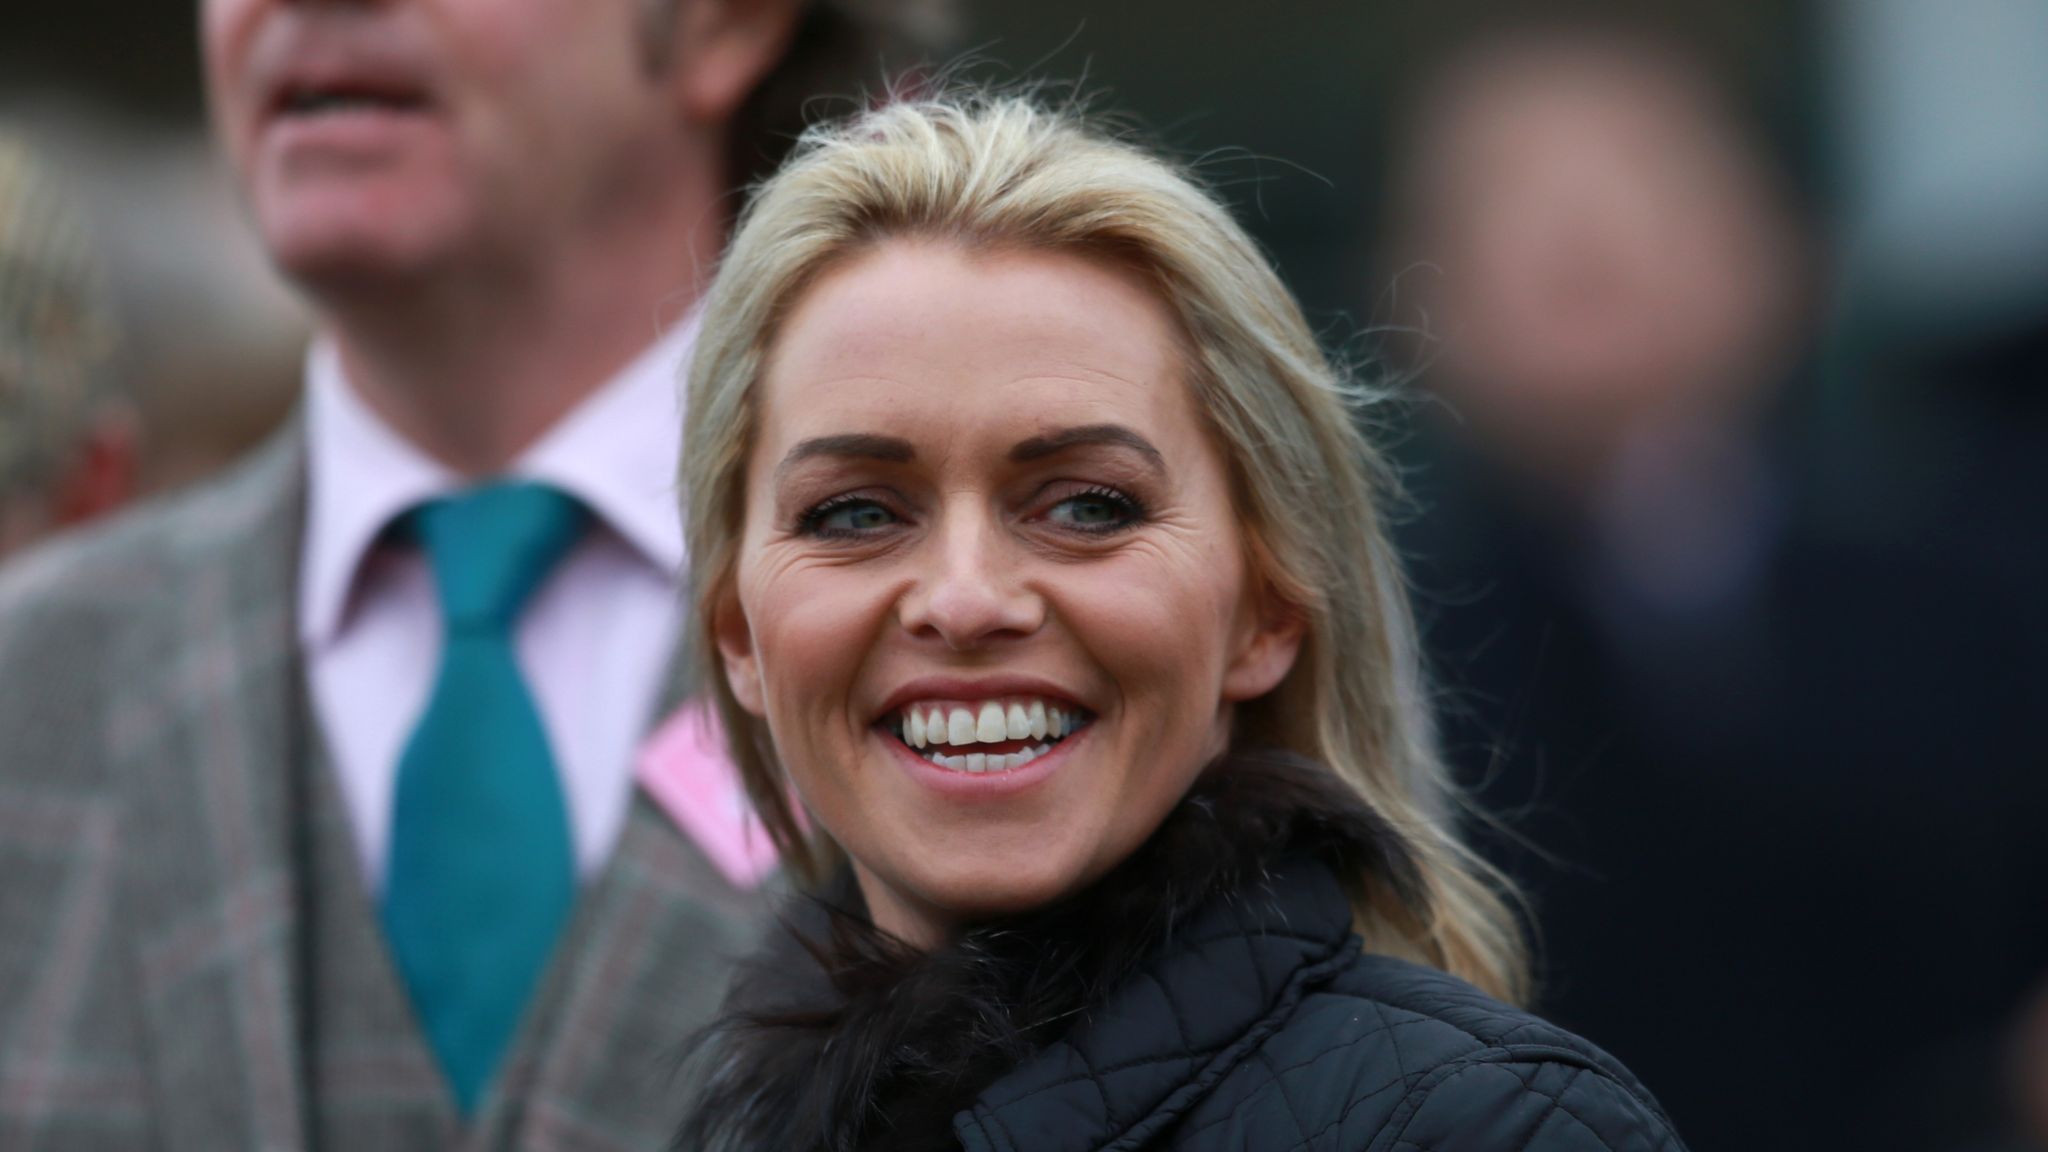 Cheltenham Festival National Hunt Chase The Aim For Pats Fancy And Rebecca Curtis After